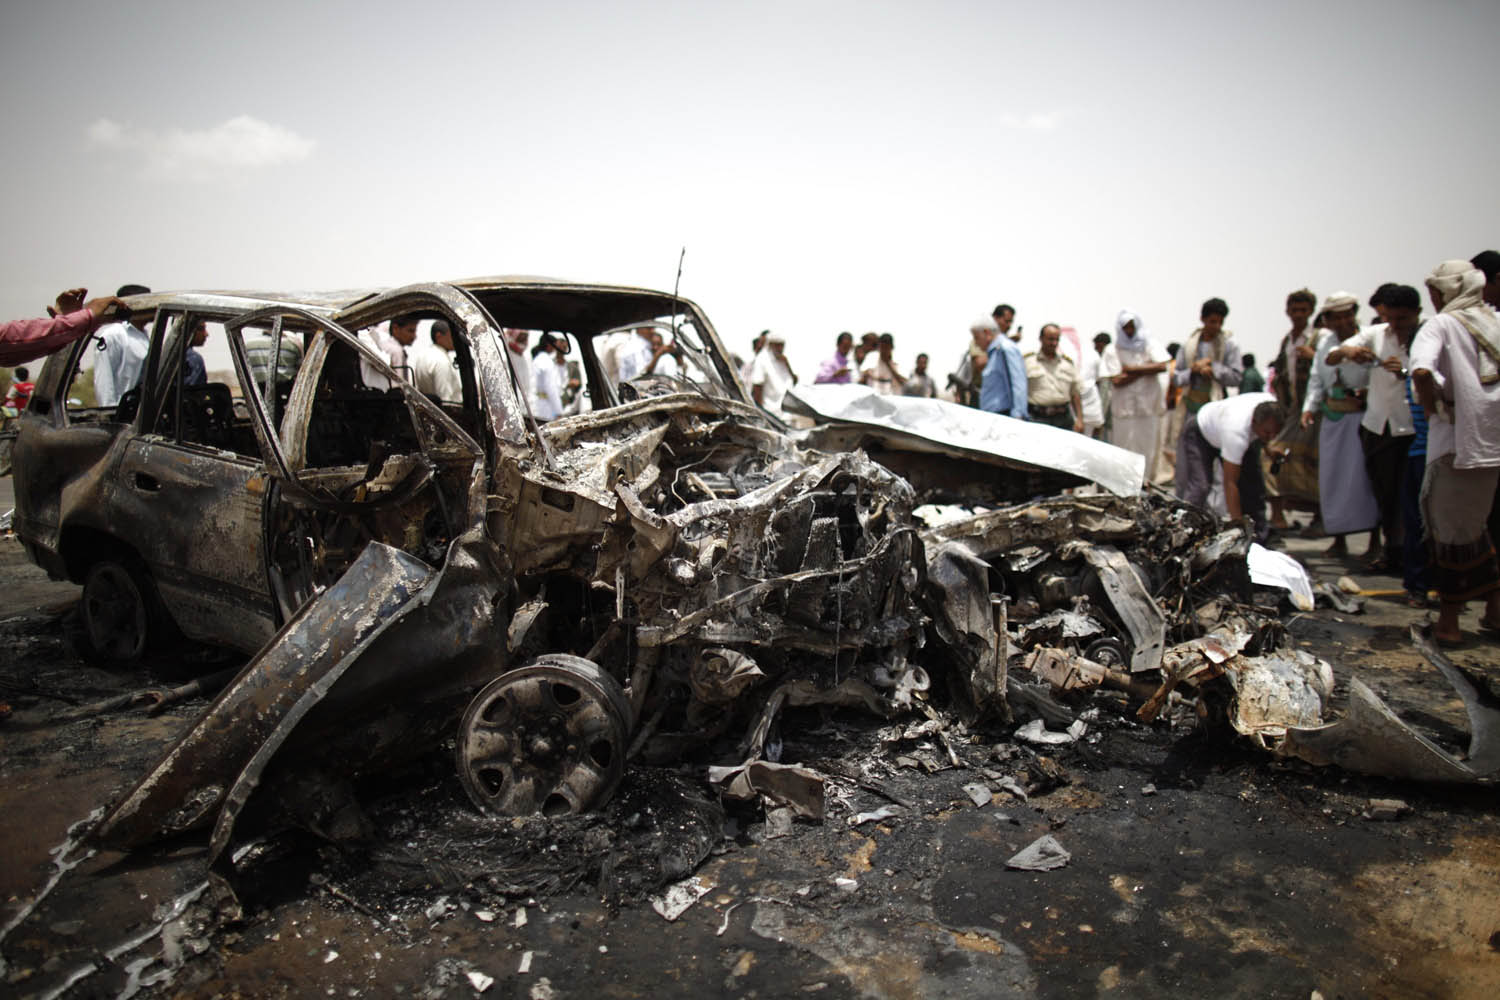 Policemen and people check the scene of a collision on a highway leading to a border crossing between Yemen and Saudi Arabia